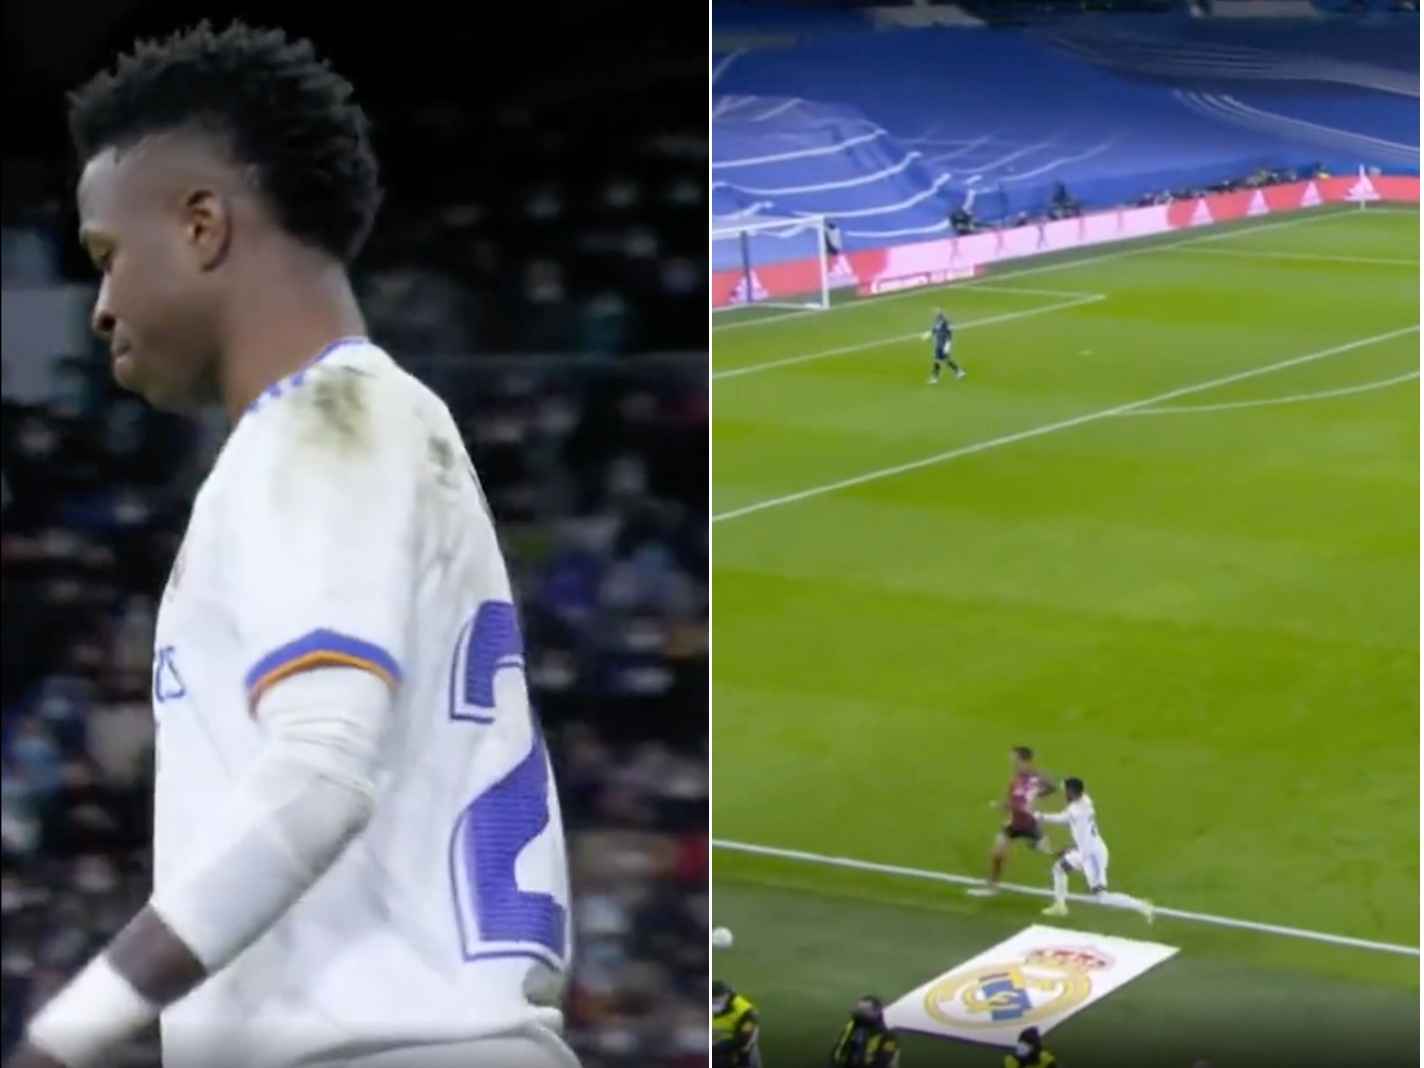 Vinicius jumped because he didn’t want to step on the Real Madrid crest laid out on the turf